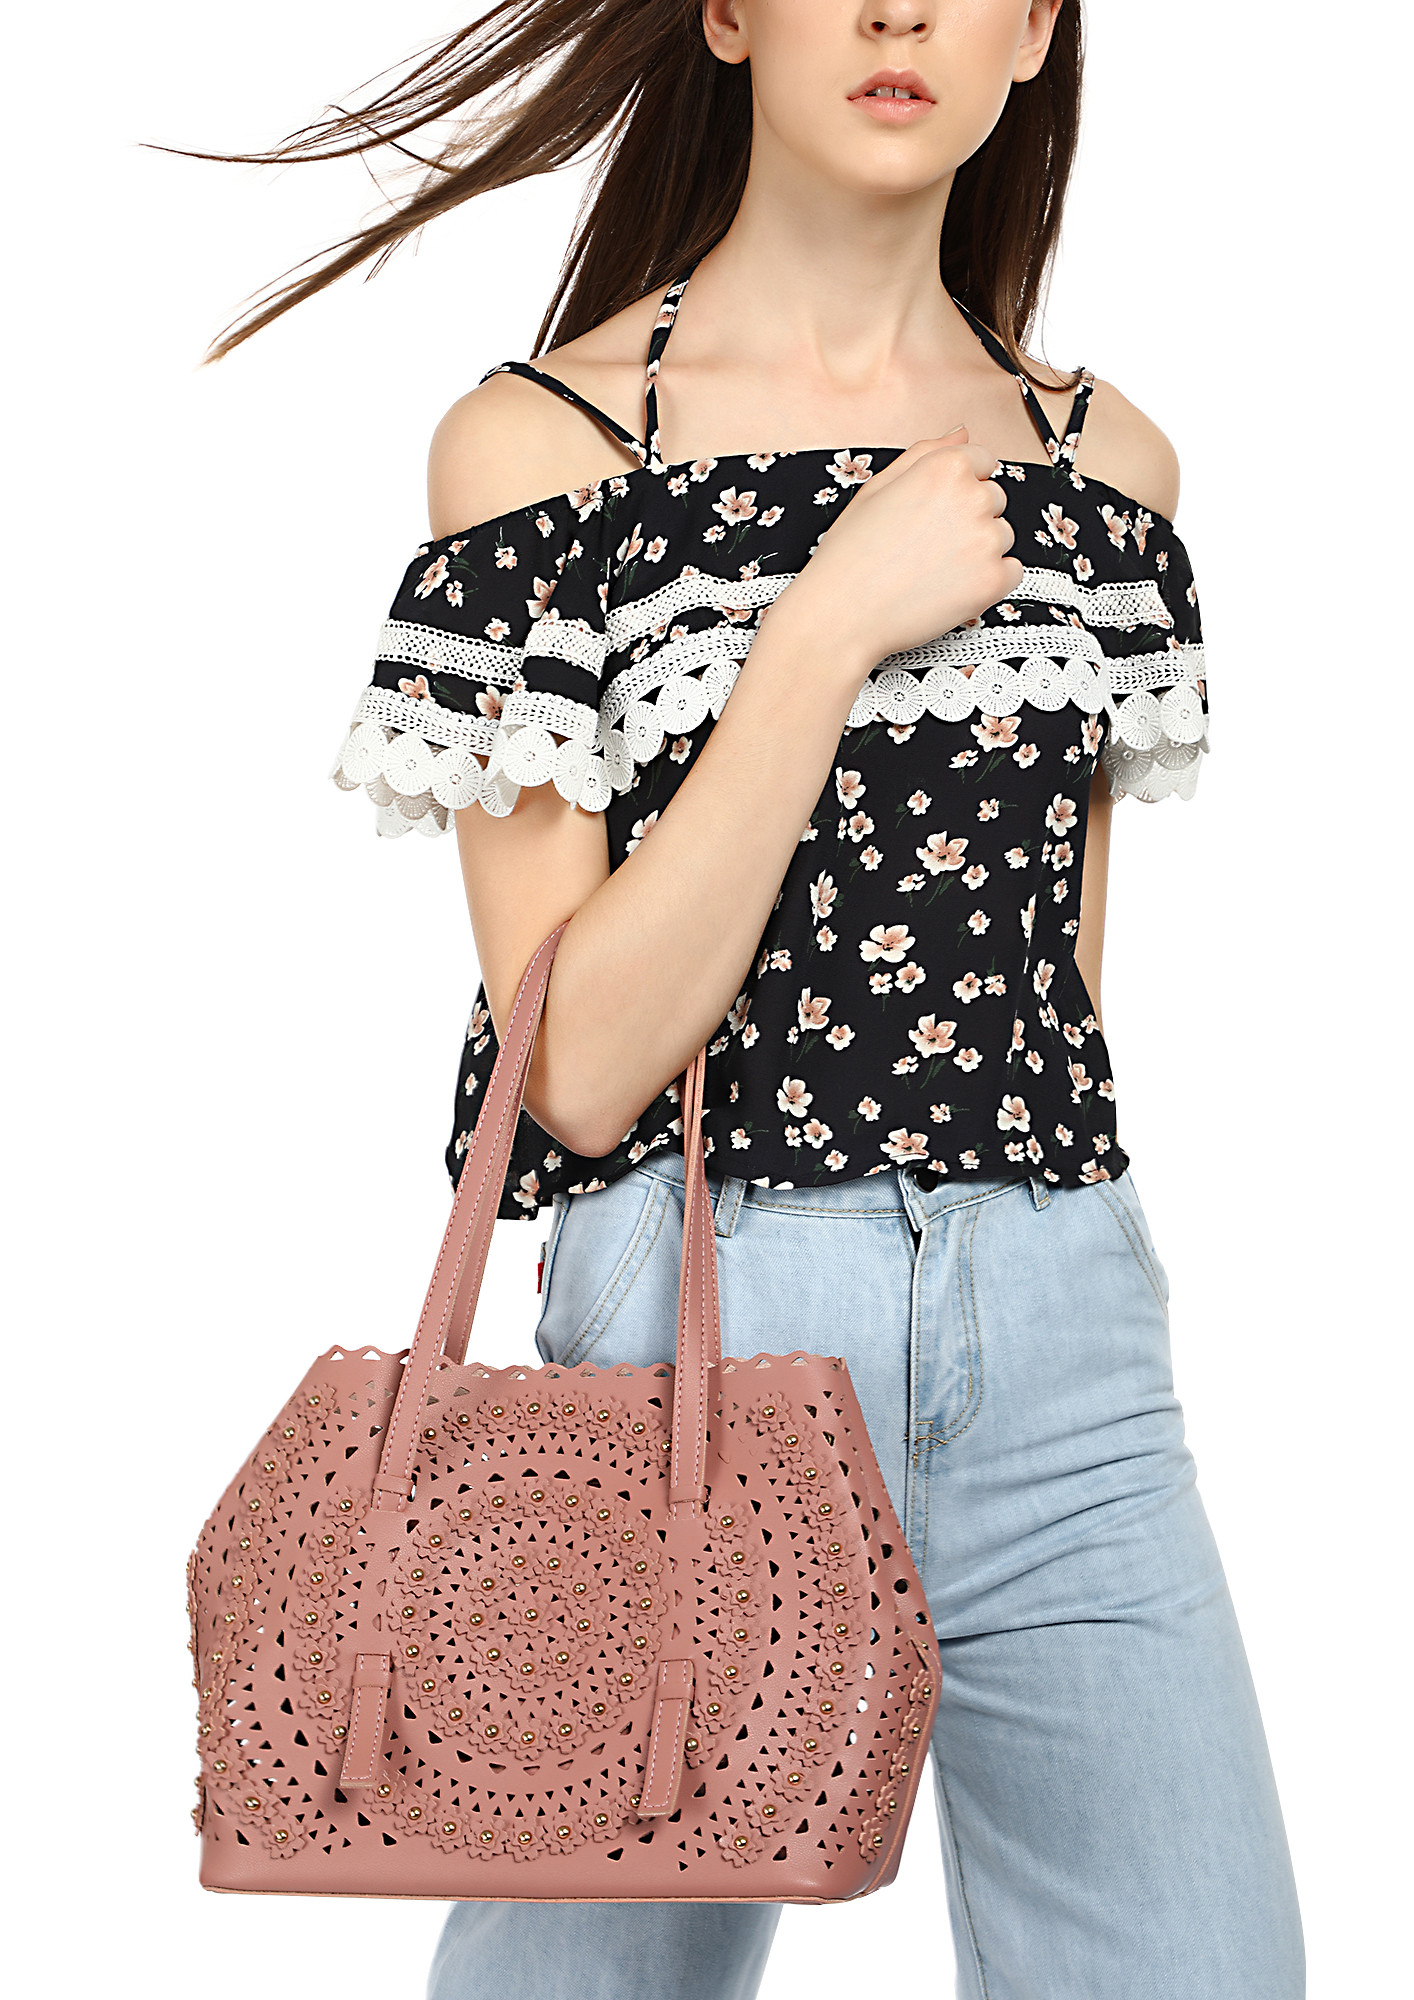 ADORNED WITH PERFECTION PINK TOTE BAG